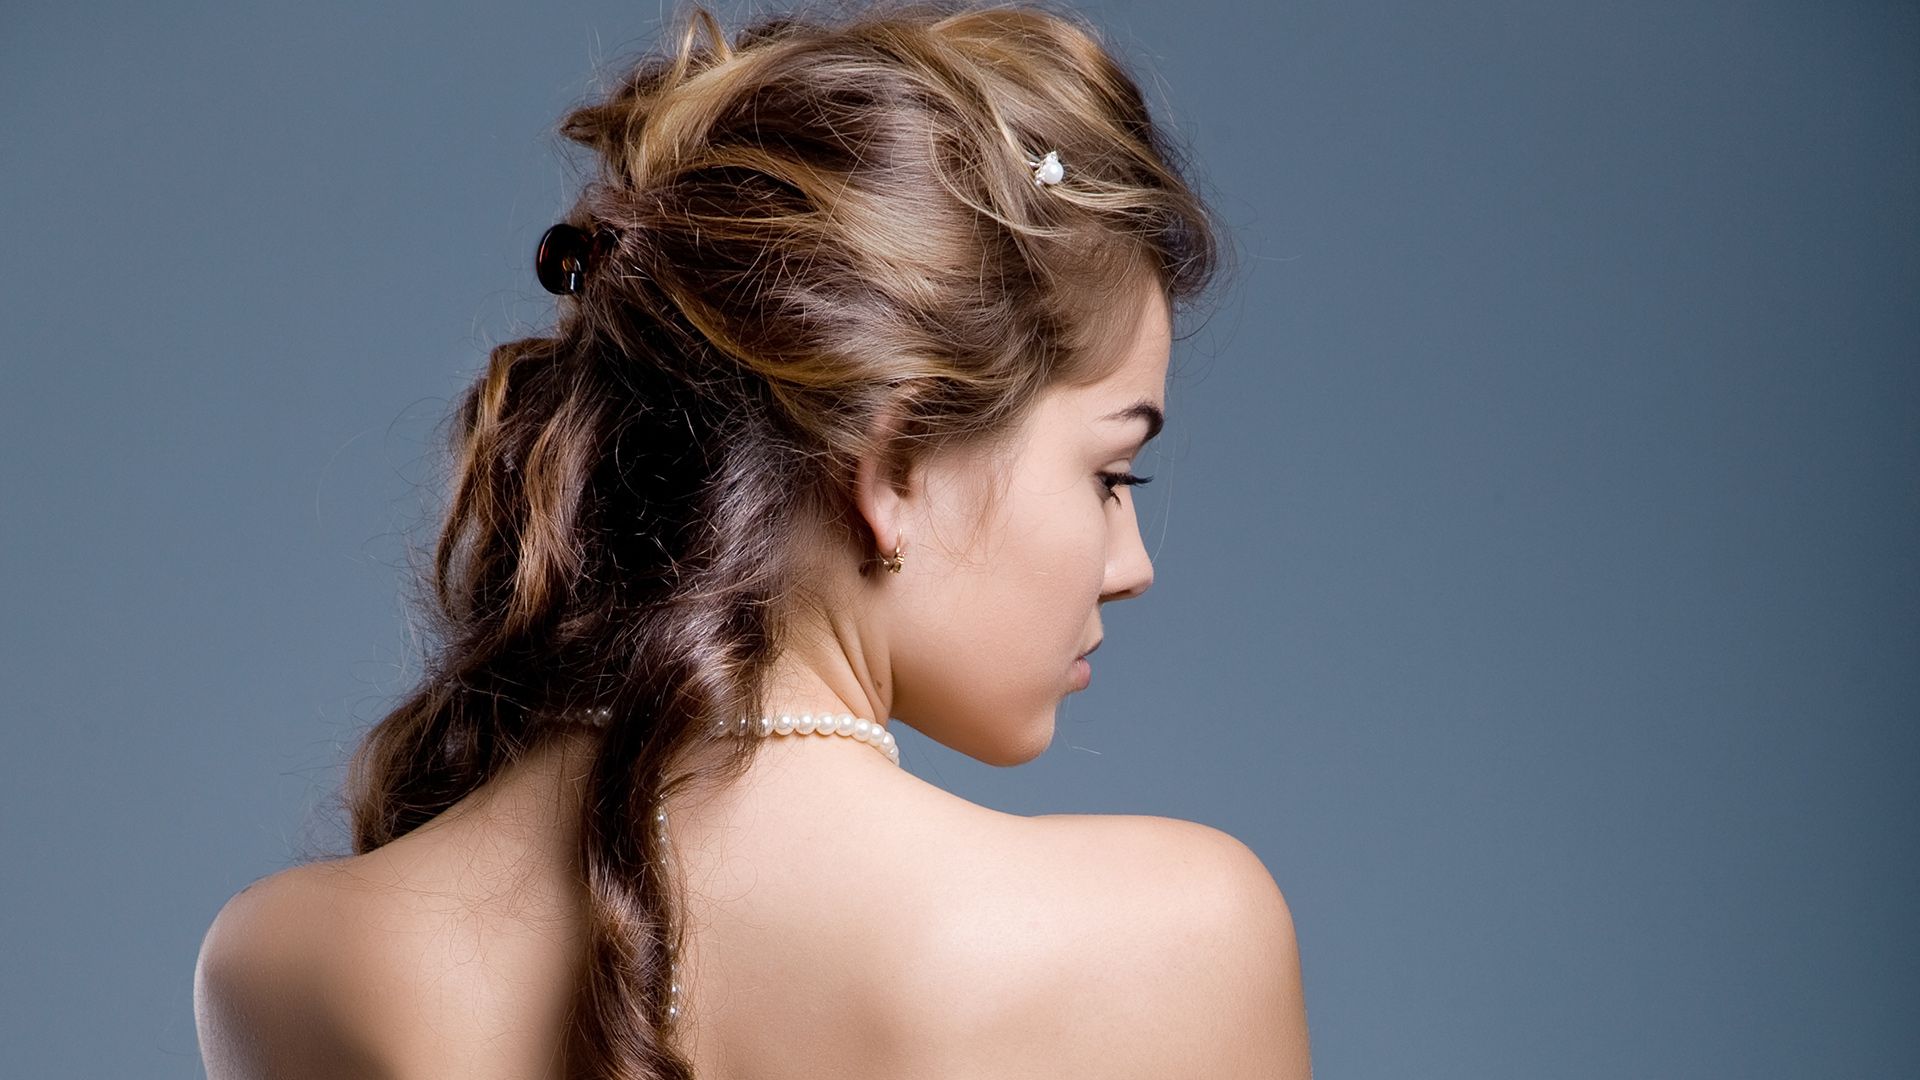 Women Hairstyle Wallpapers - Wallpaper Cave